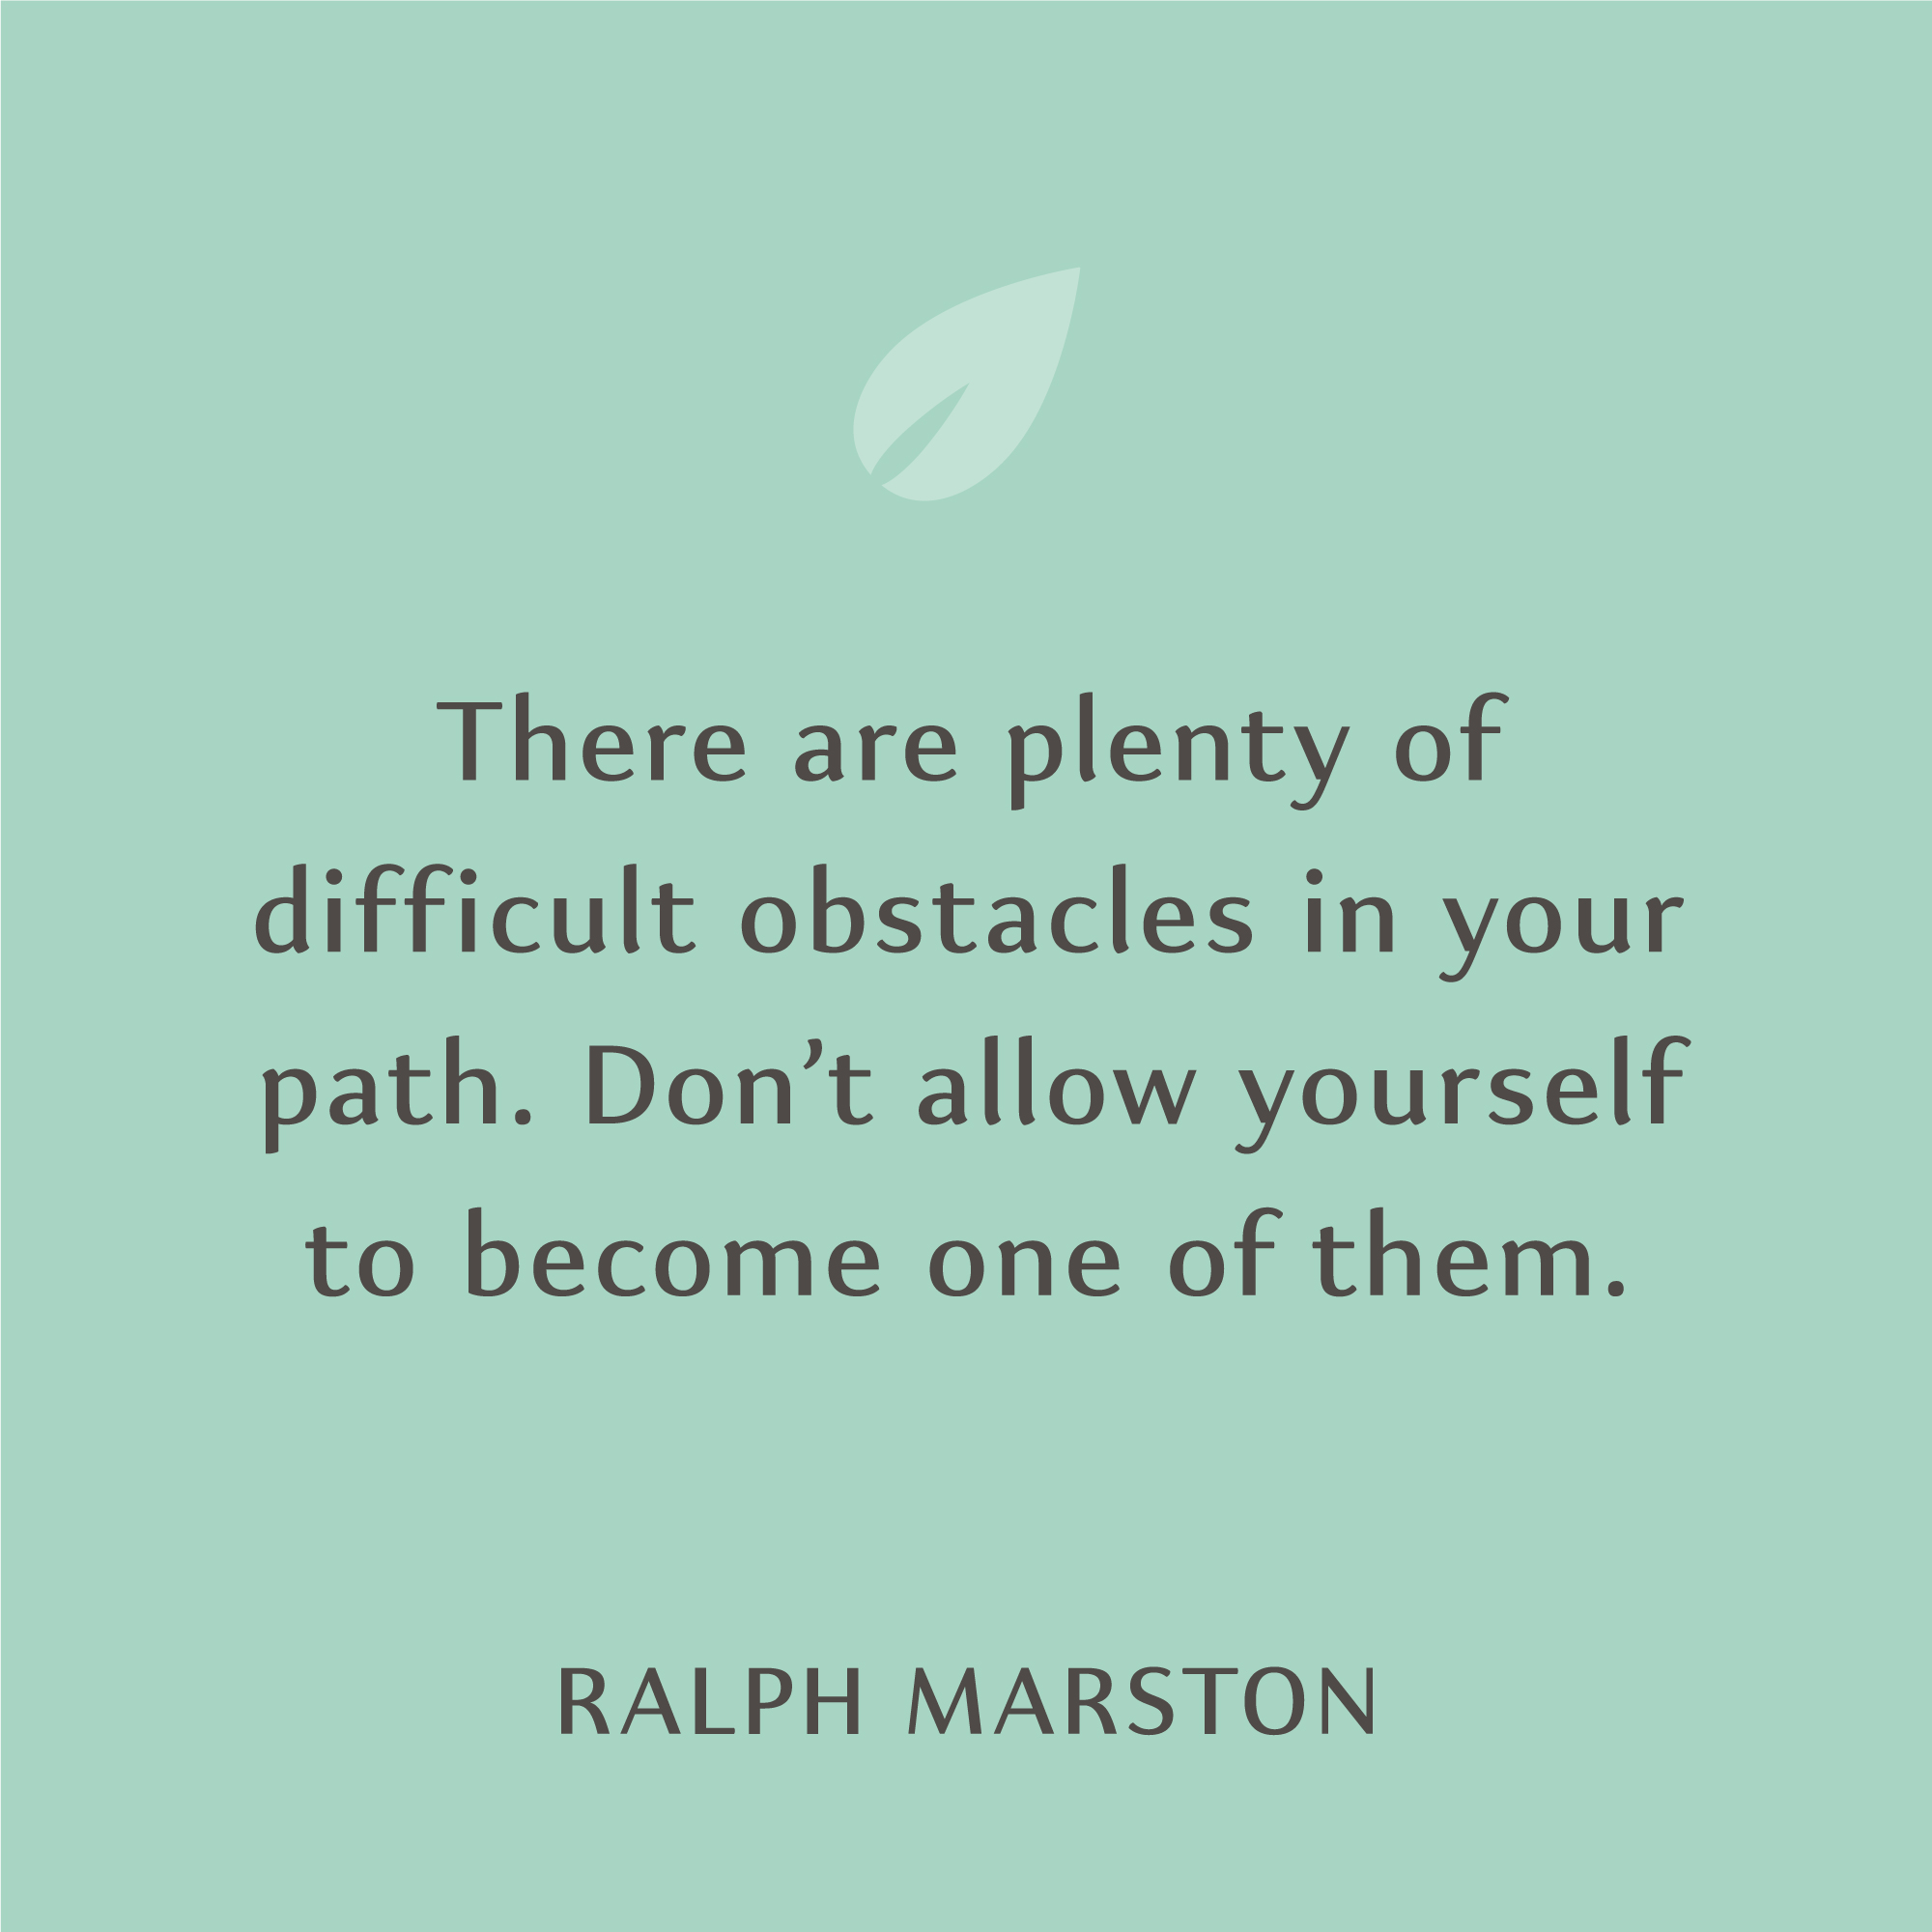 There are plenty of difficult obstacles in your path